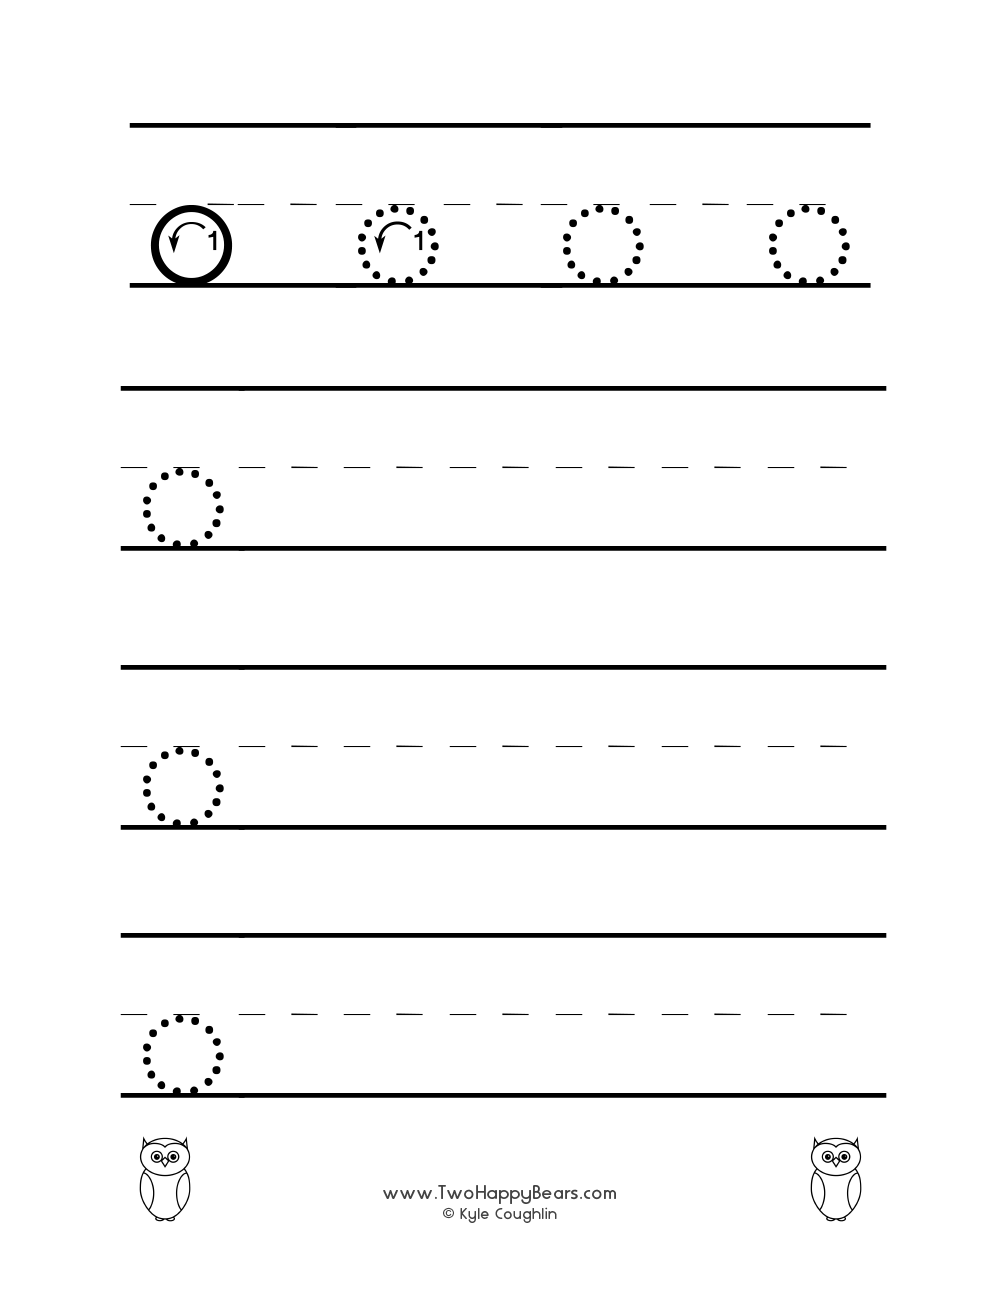 Worksheet for tracing and writing the lowercase letter O, in free printable PDF format.